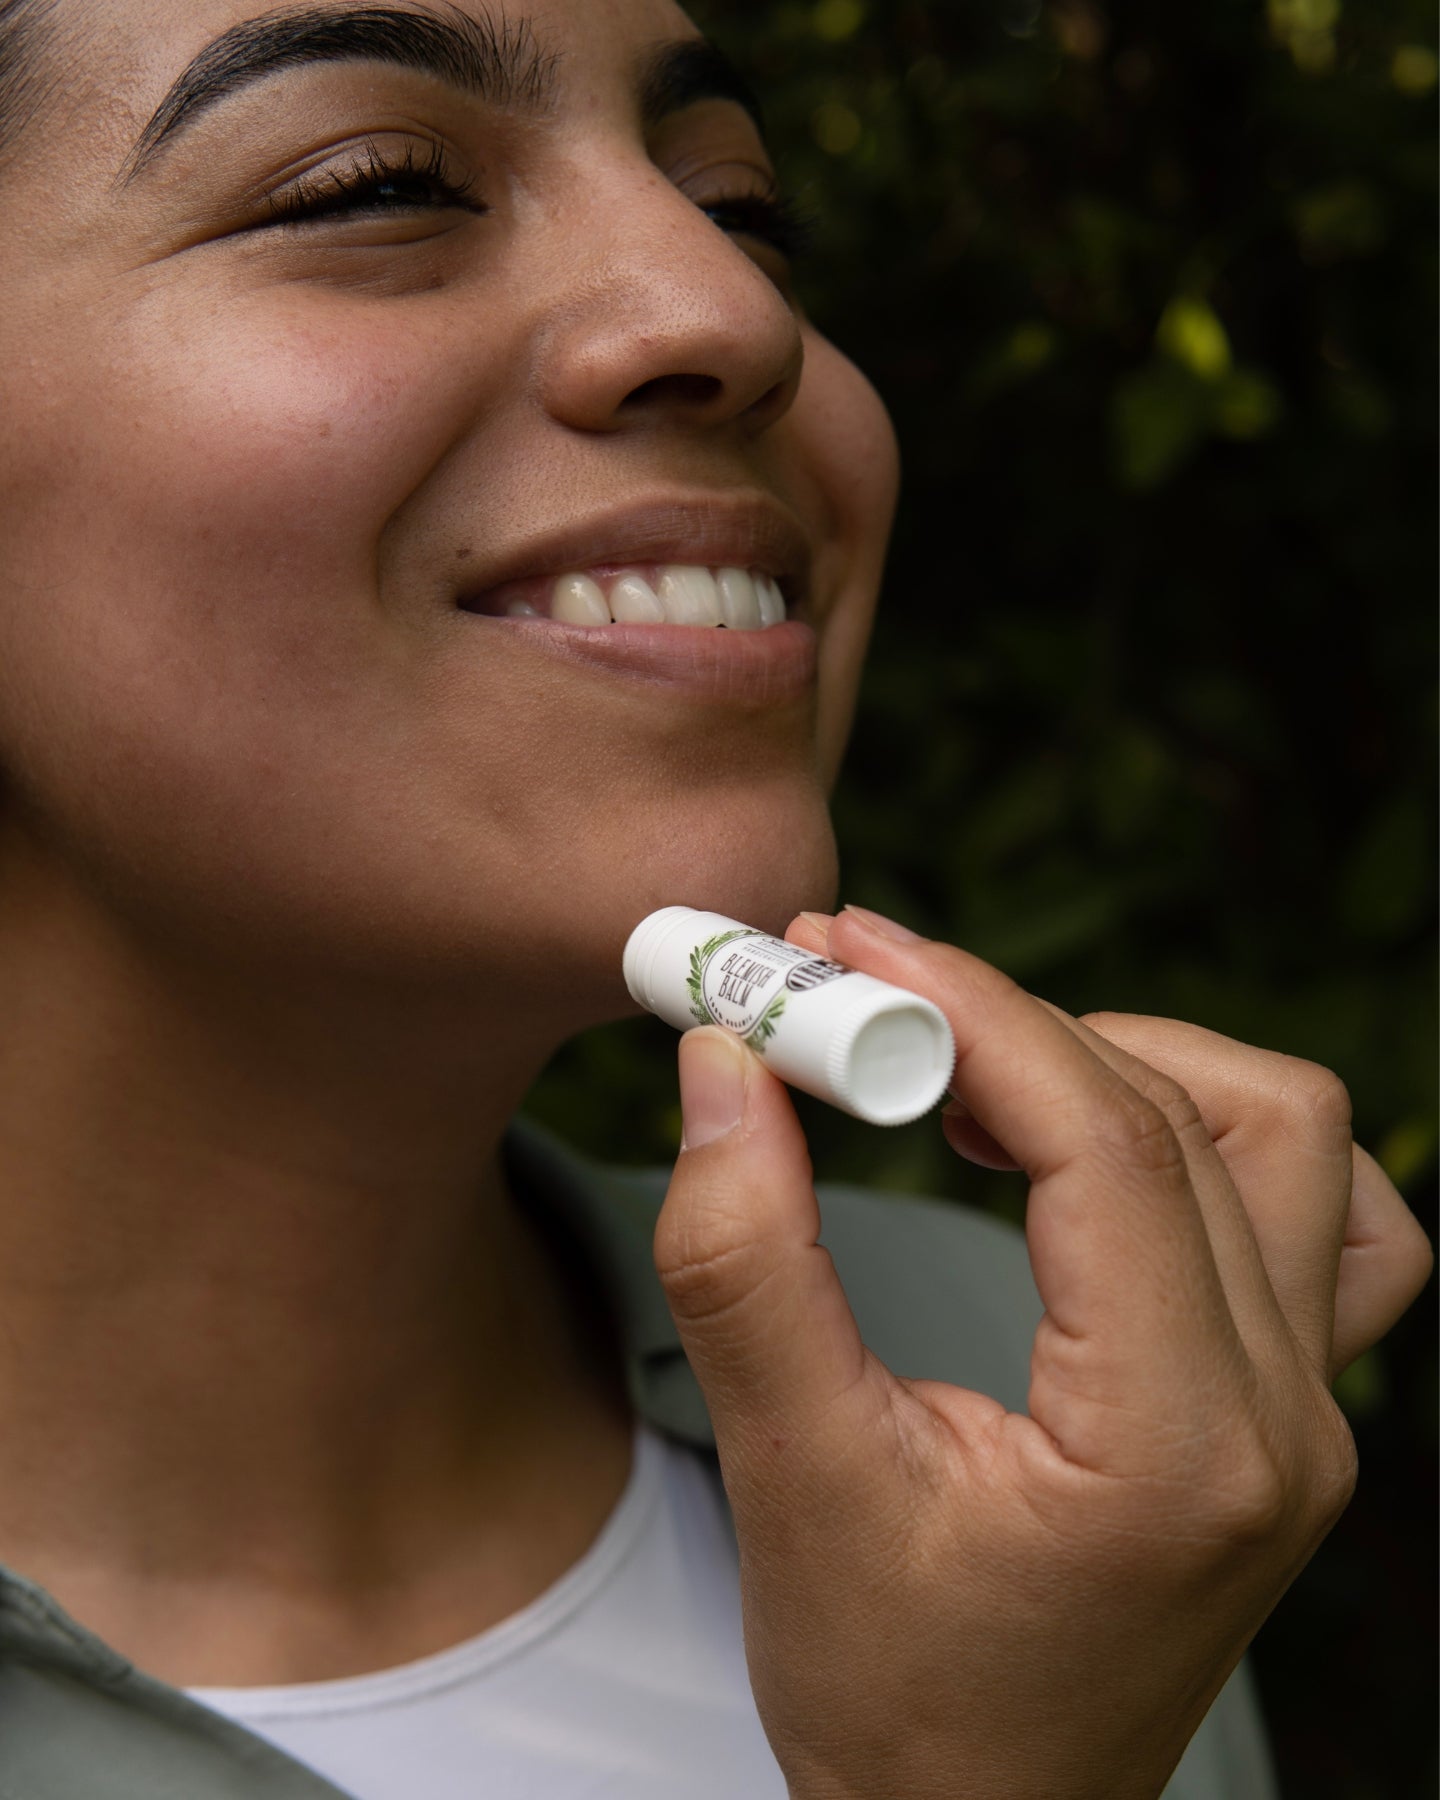 A close-up shot of a smiling woman applying the Blemish Balm on her chin.